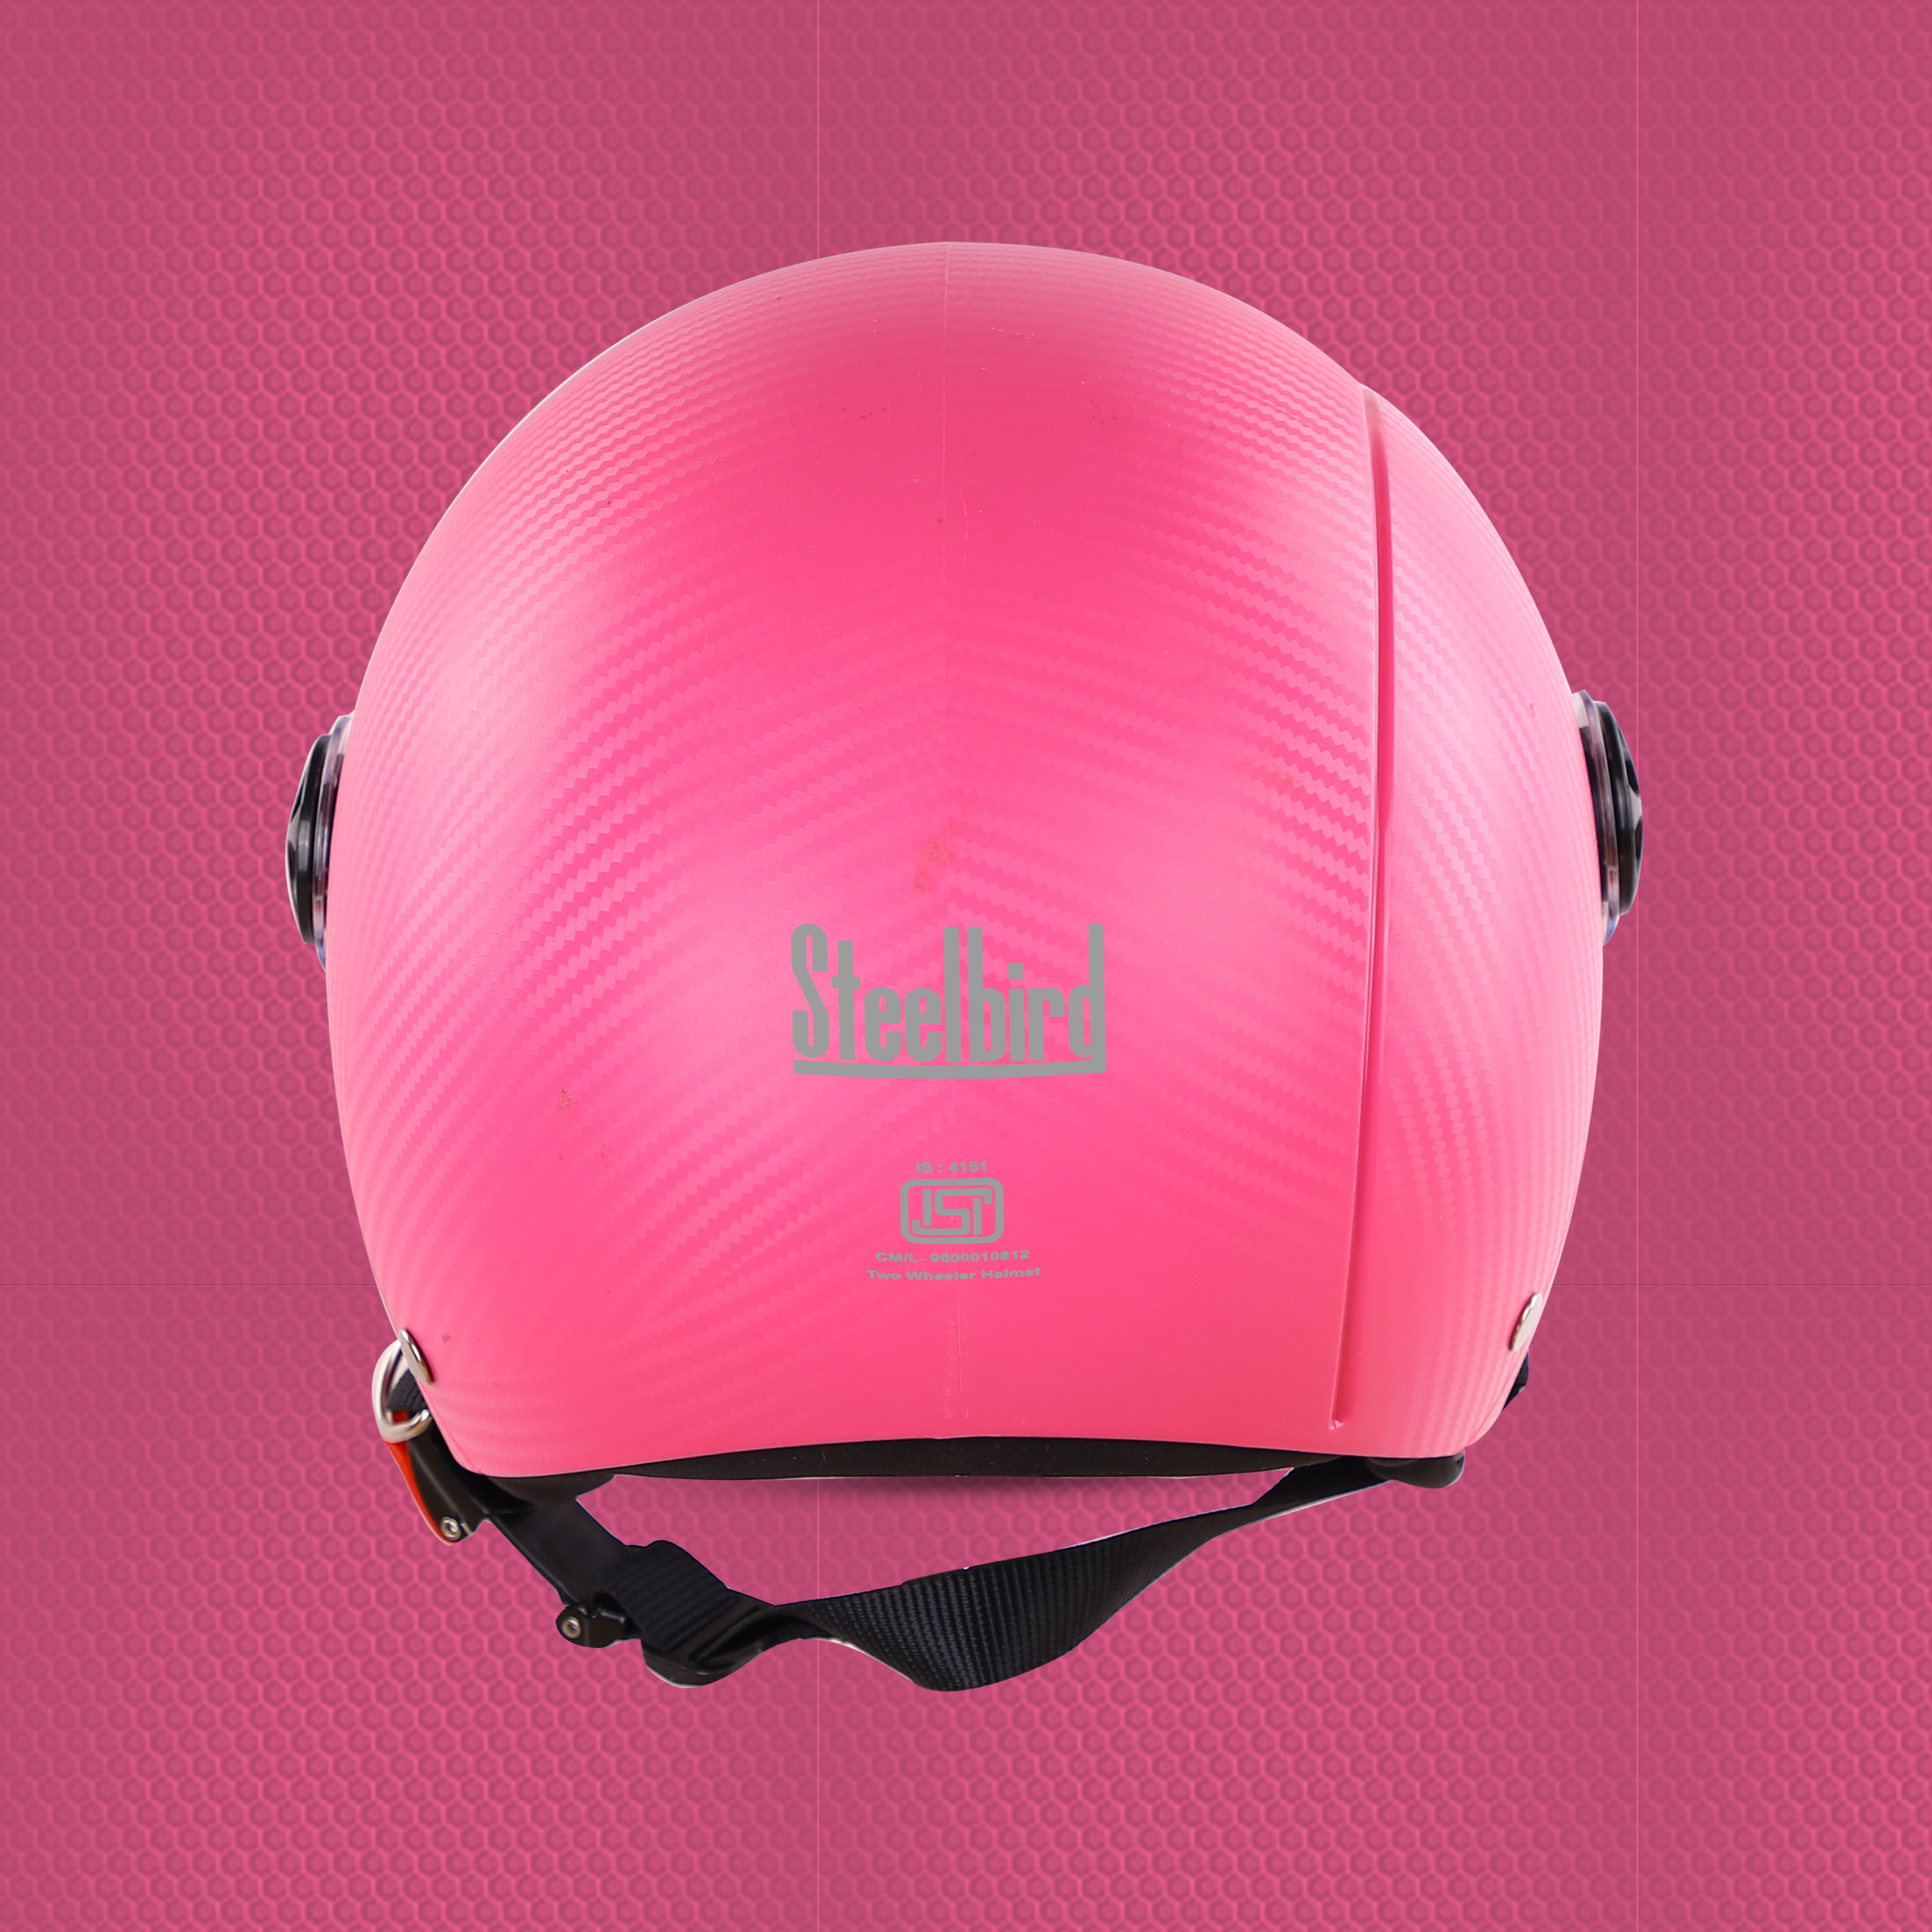 Steelbird SBH-16 Ruby ISI Certified Open Face Helmet (Dashing Pink With Clear Visor)